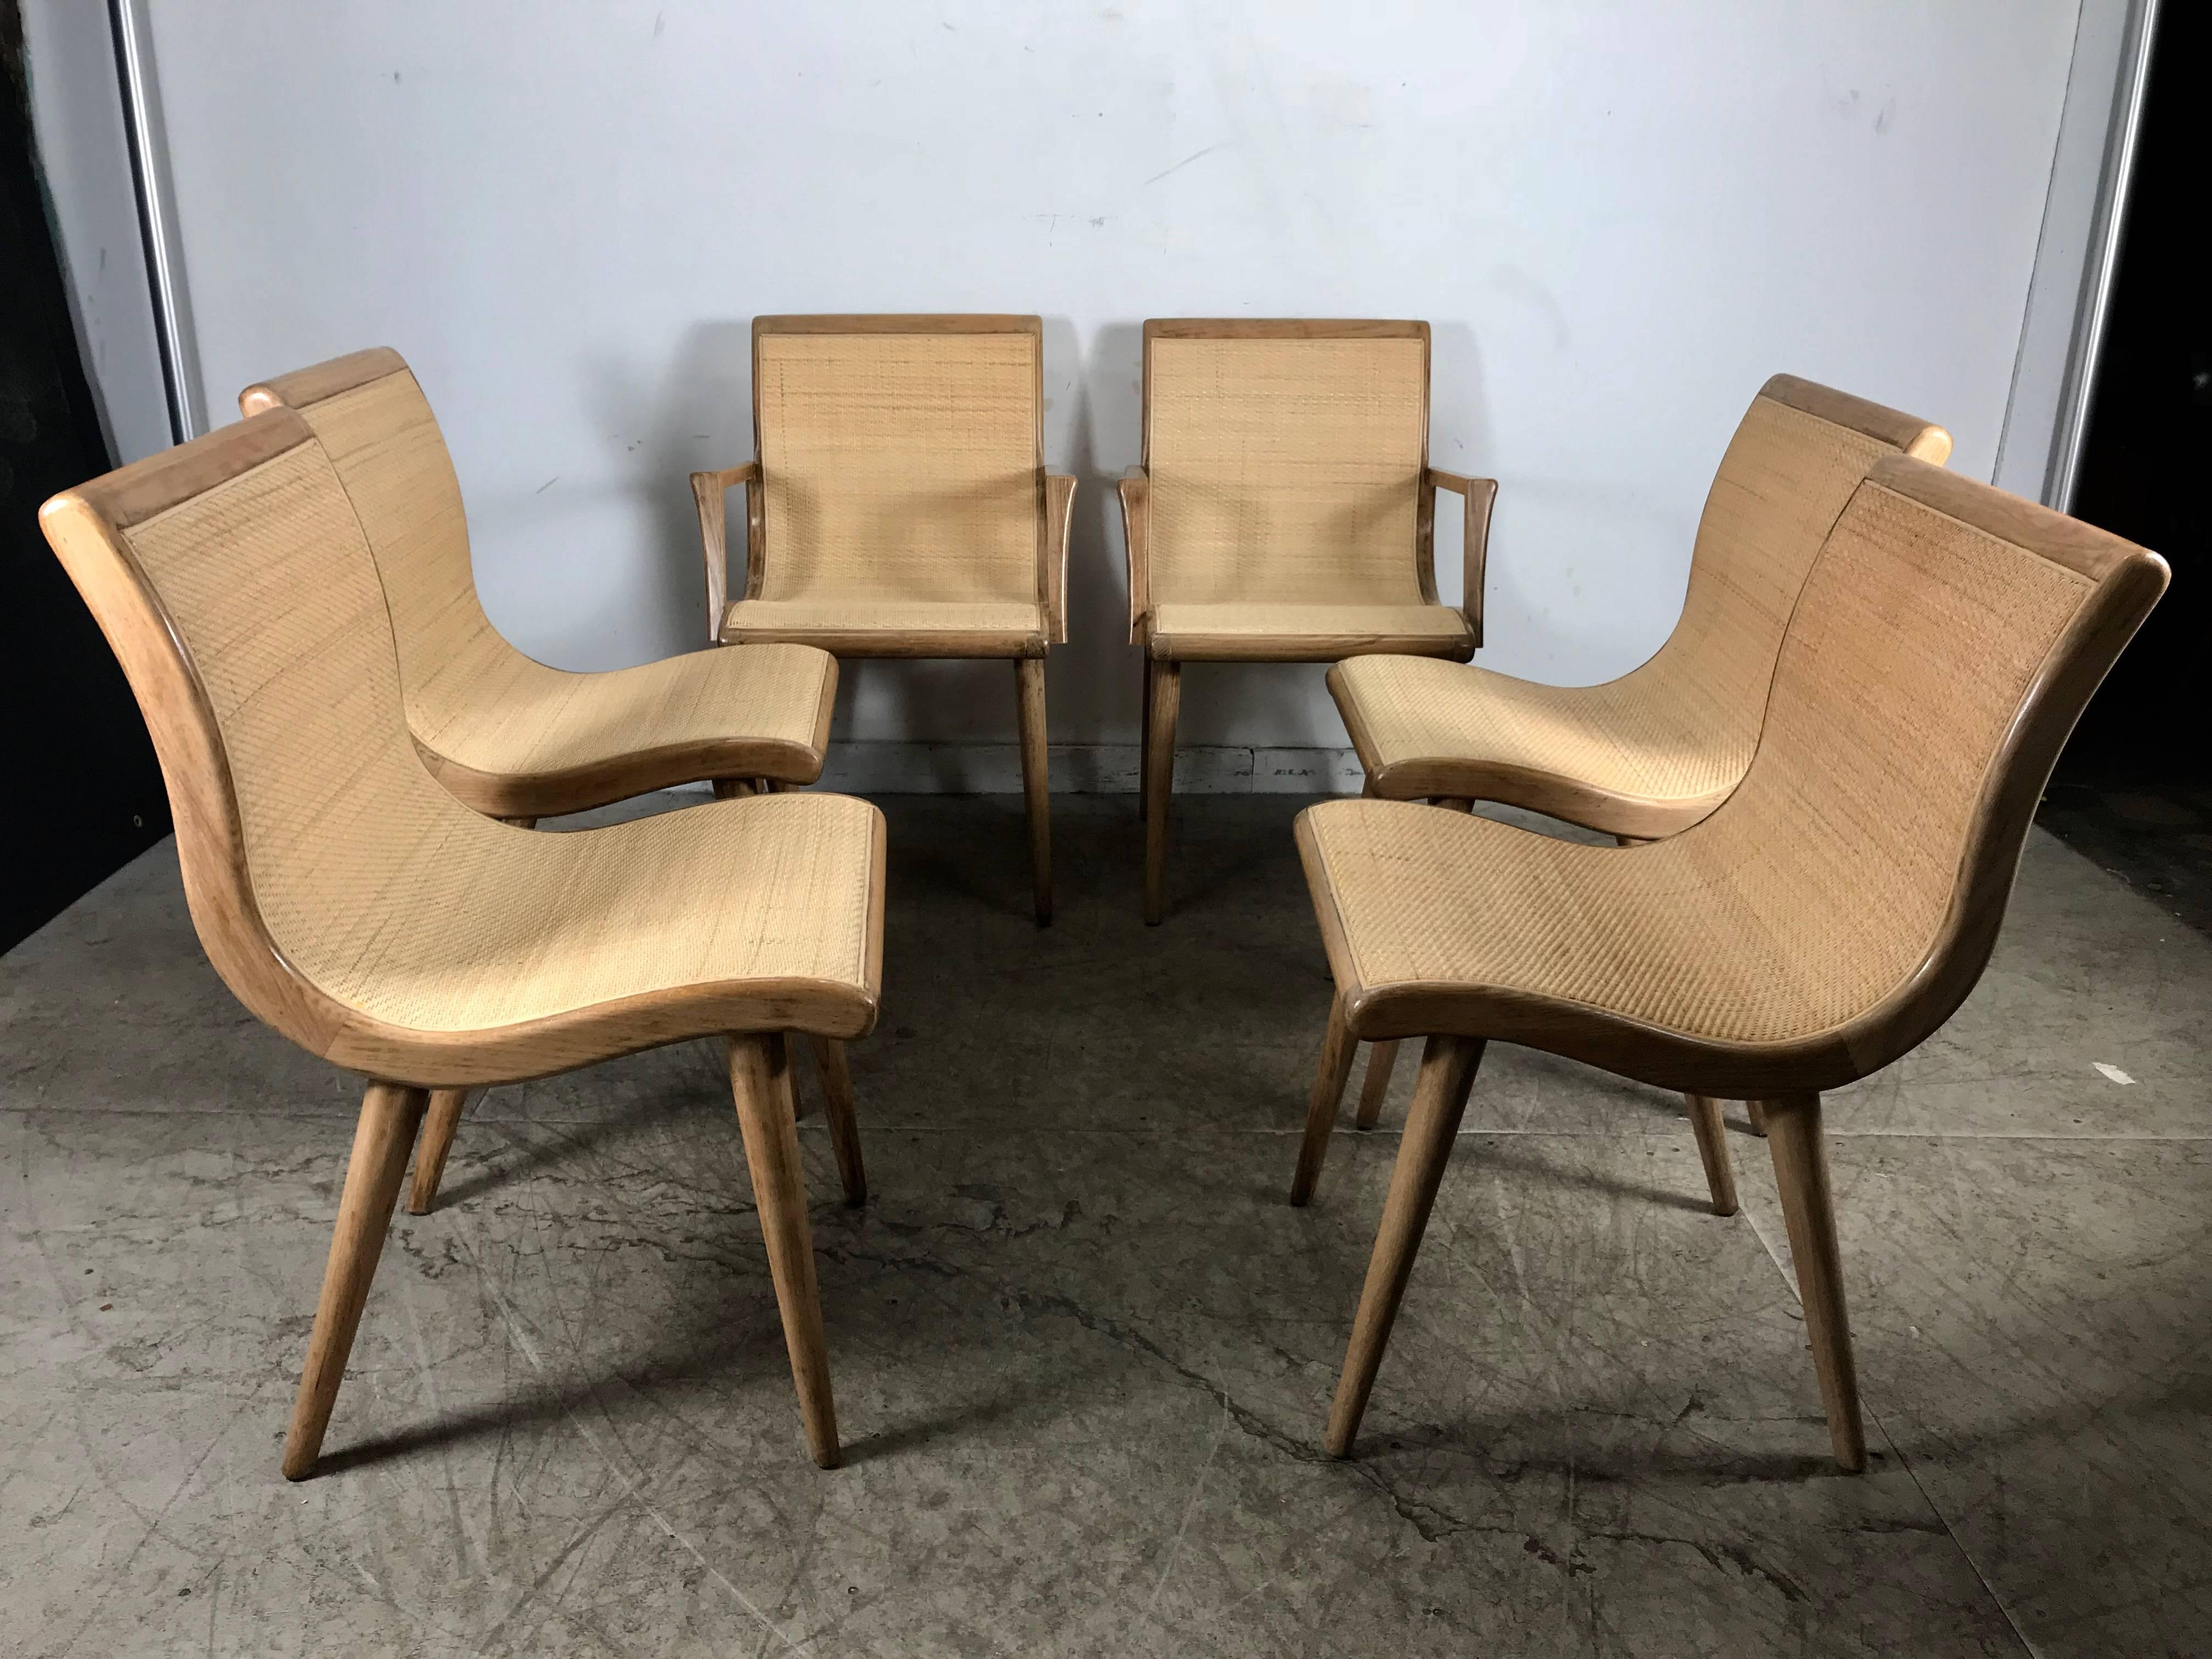 American Set of Six Midcentury Dining Chairs, Cerused Oak and Cane by Russel Wright